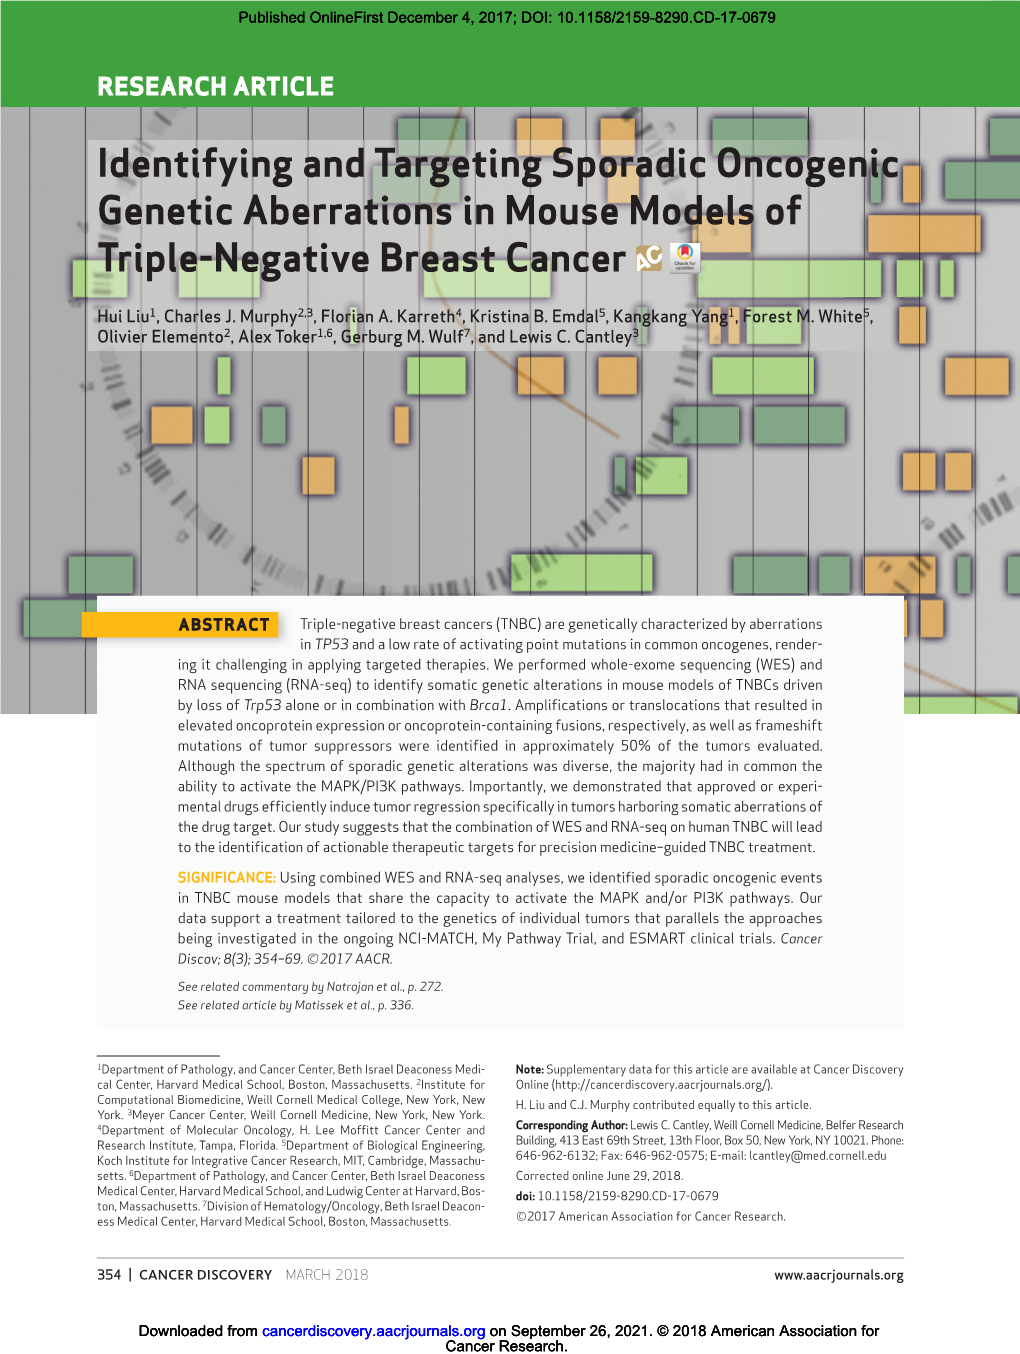 Identifying and Targeting Sporadic Oncogenic Genetic Aberrations in Mouse Models of Triple-Negative Breast Cancer